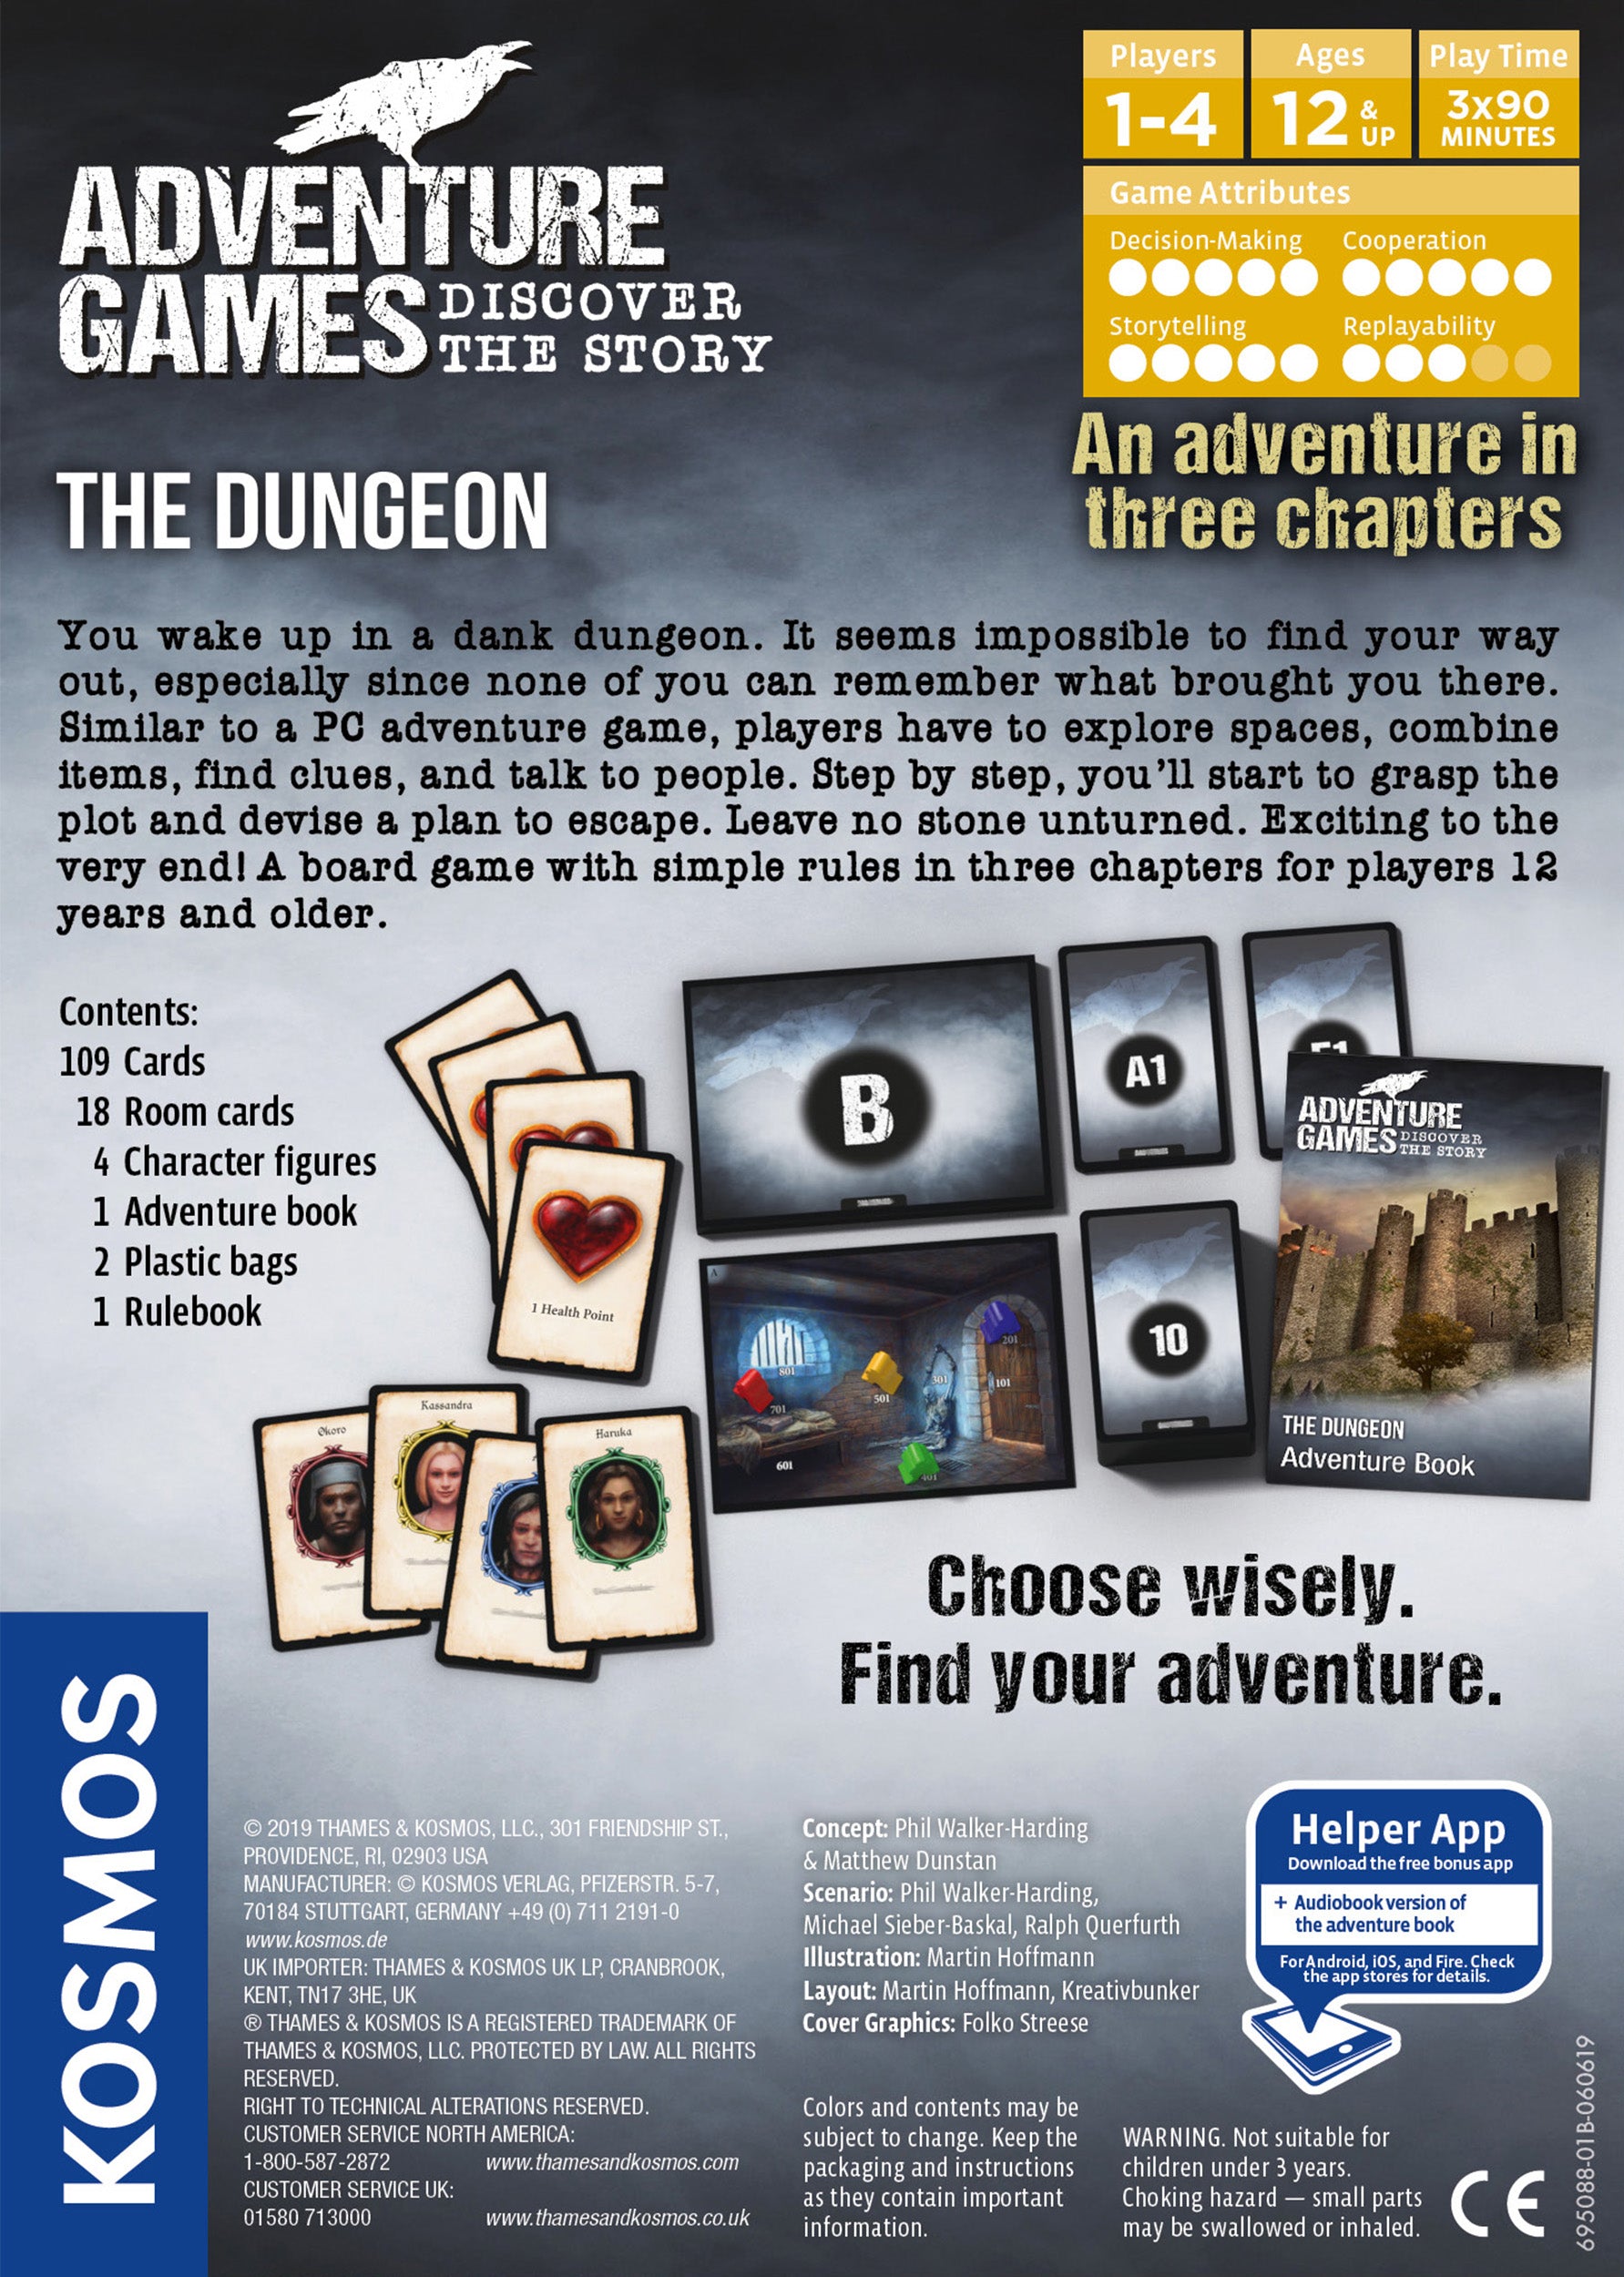 The Dungeon - Adventure Games Discover The Story    